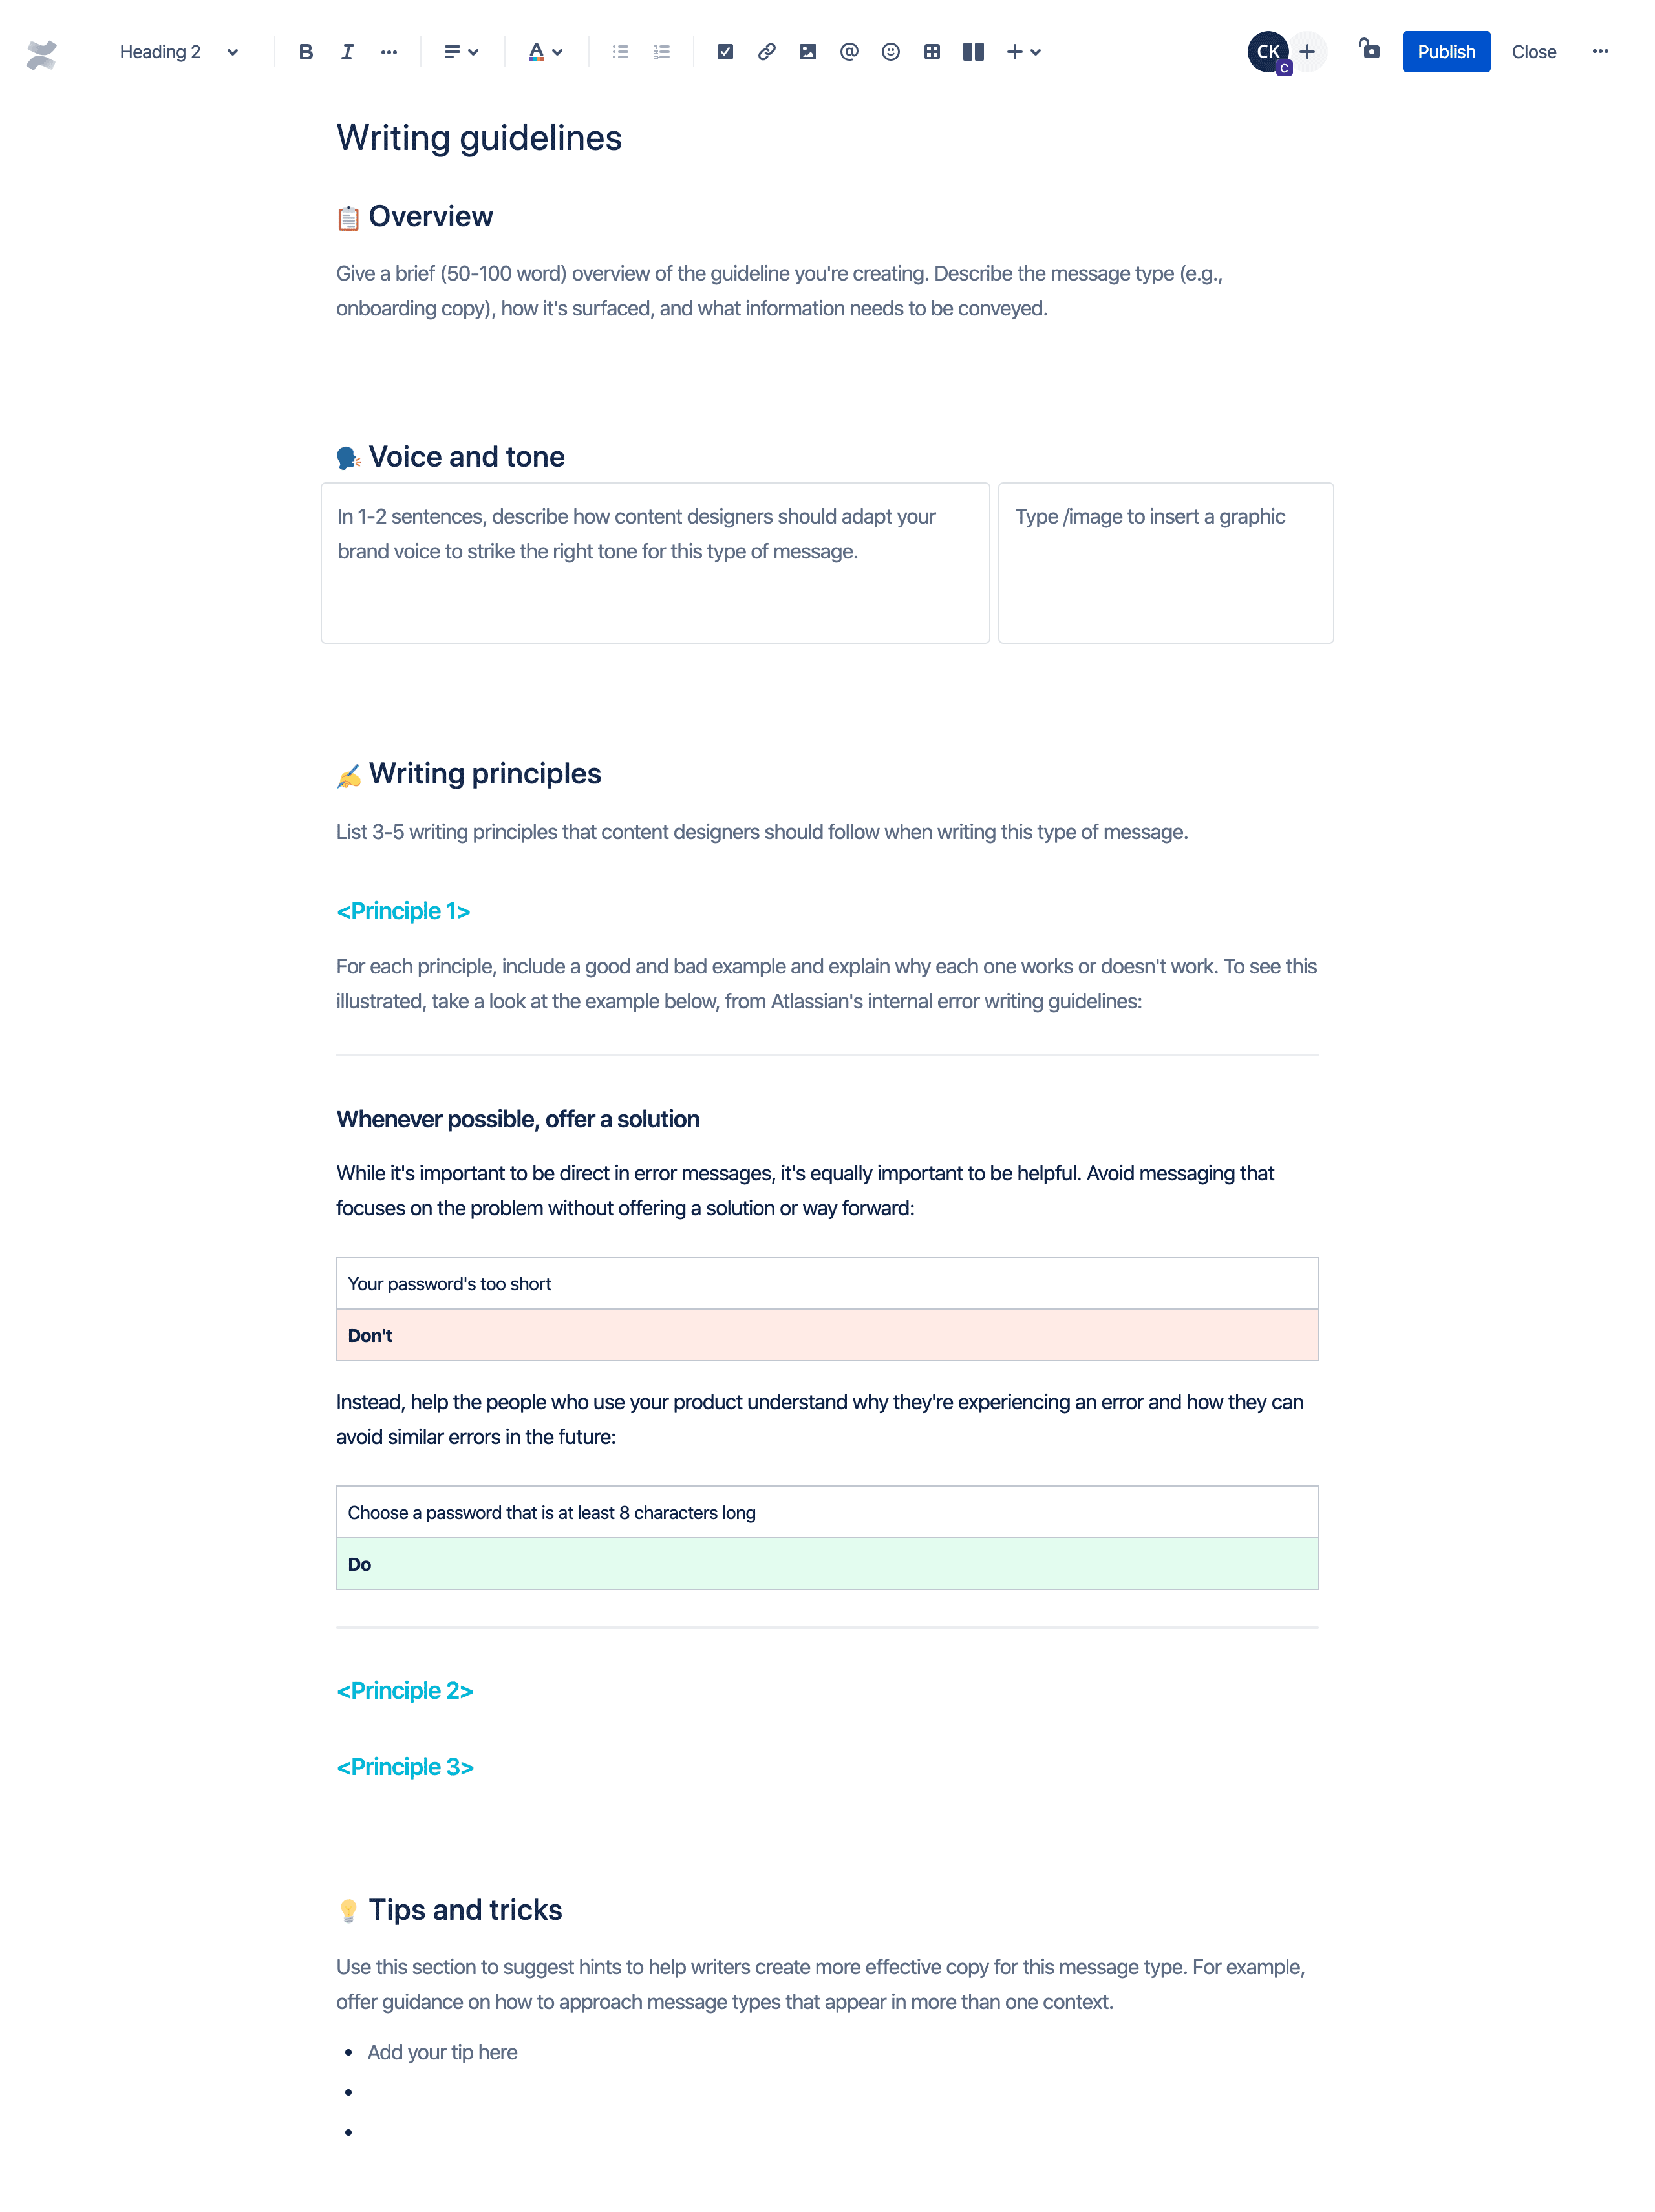 Writing guidelines template